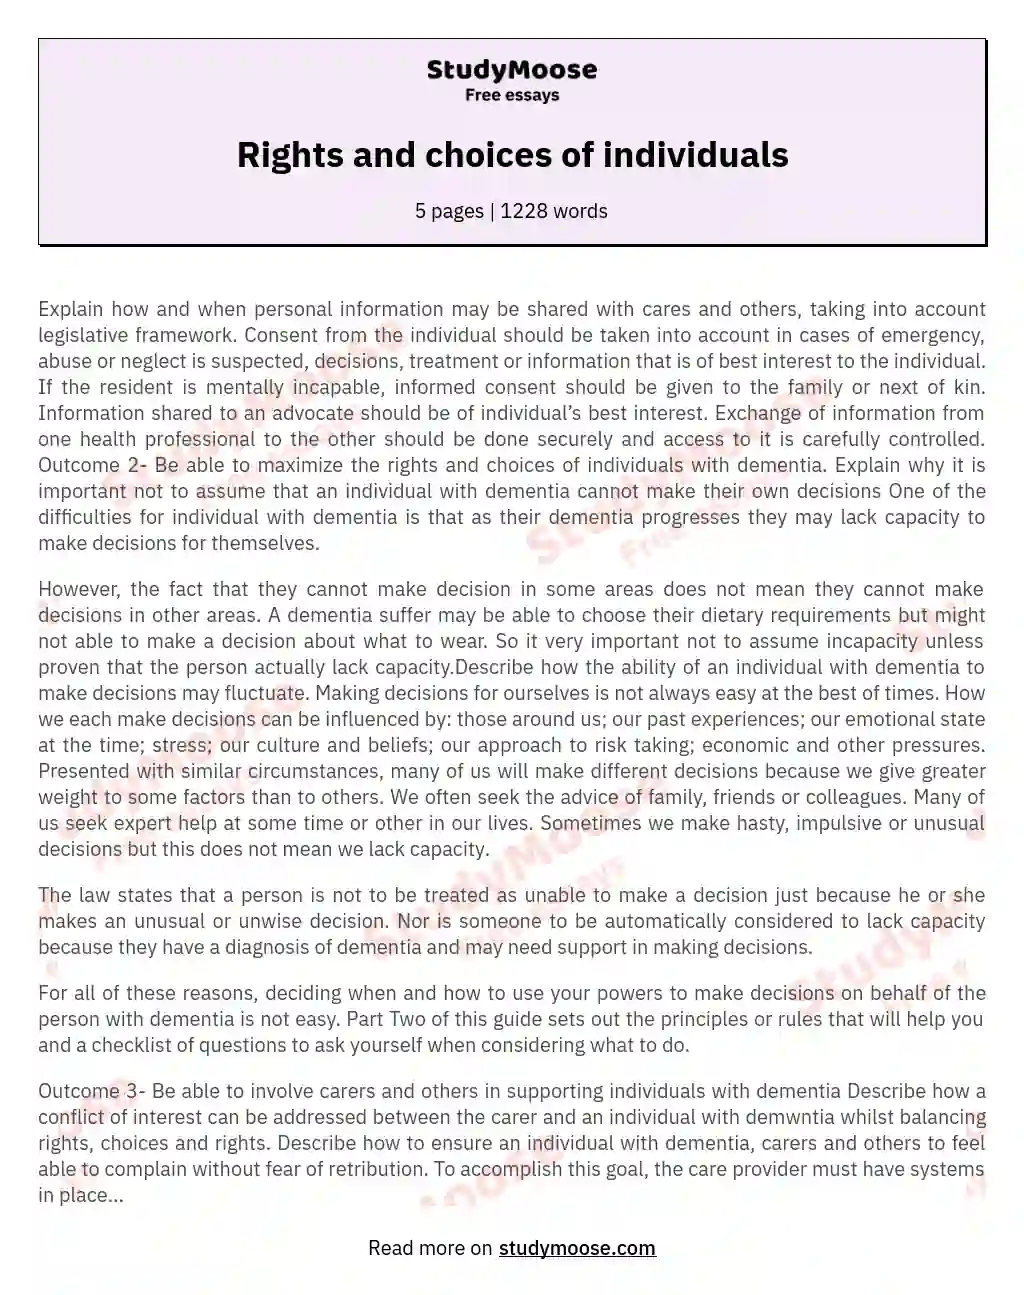 Rights and choices of individuals essay